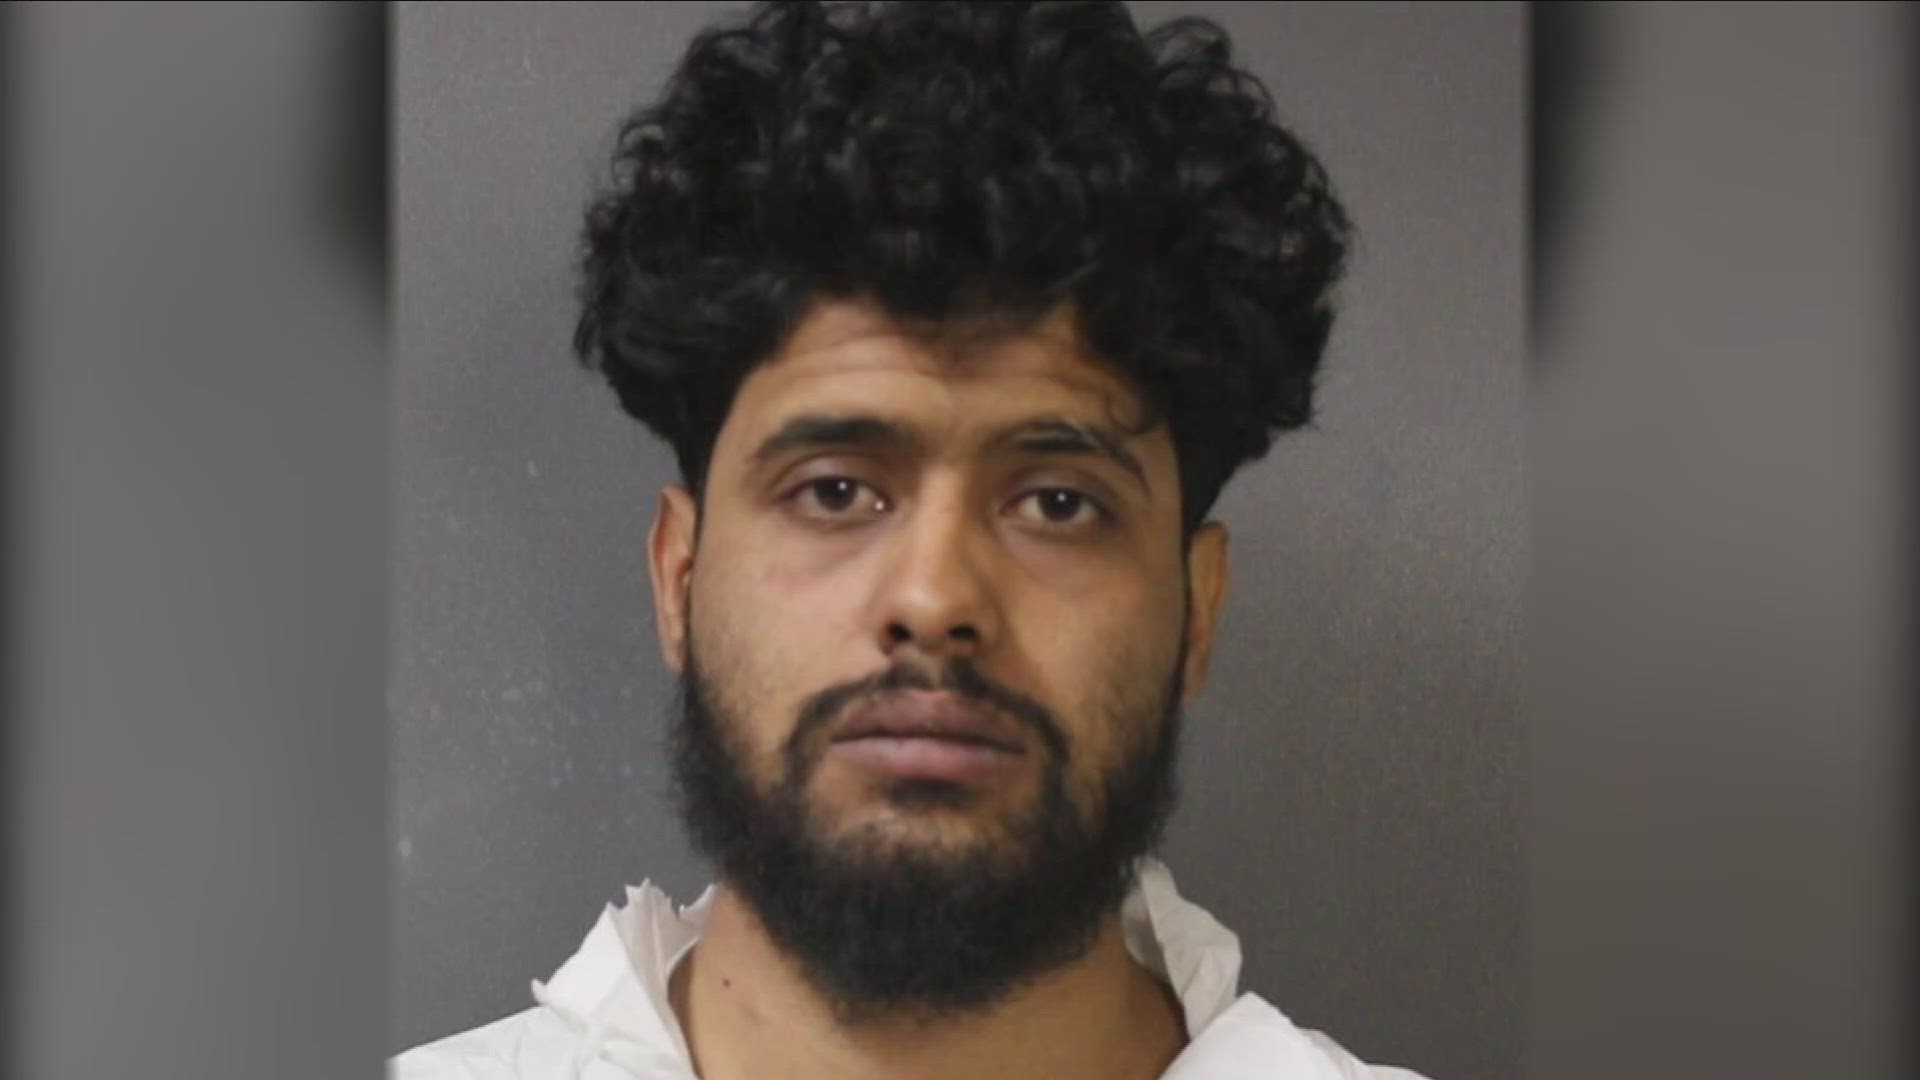 THE D-A SAYS HUSSEIN KILLED 62-YEAR-OLD TAWFAIK ALSHEARI AT THE SEARS FOOD ENTERPRISE STORE ON BROADWAY.